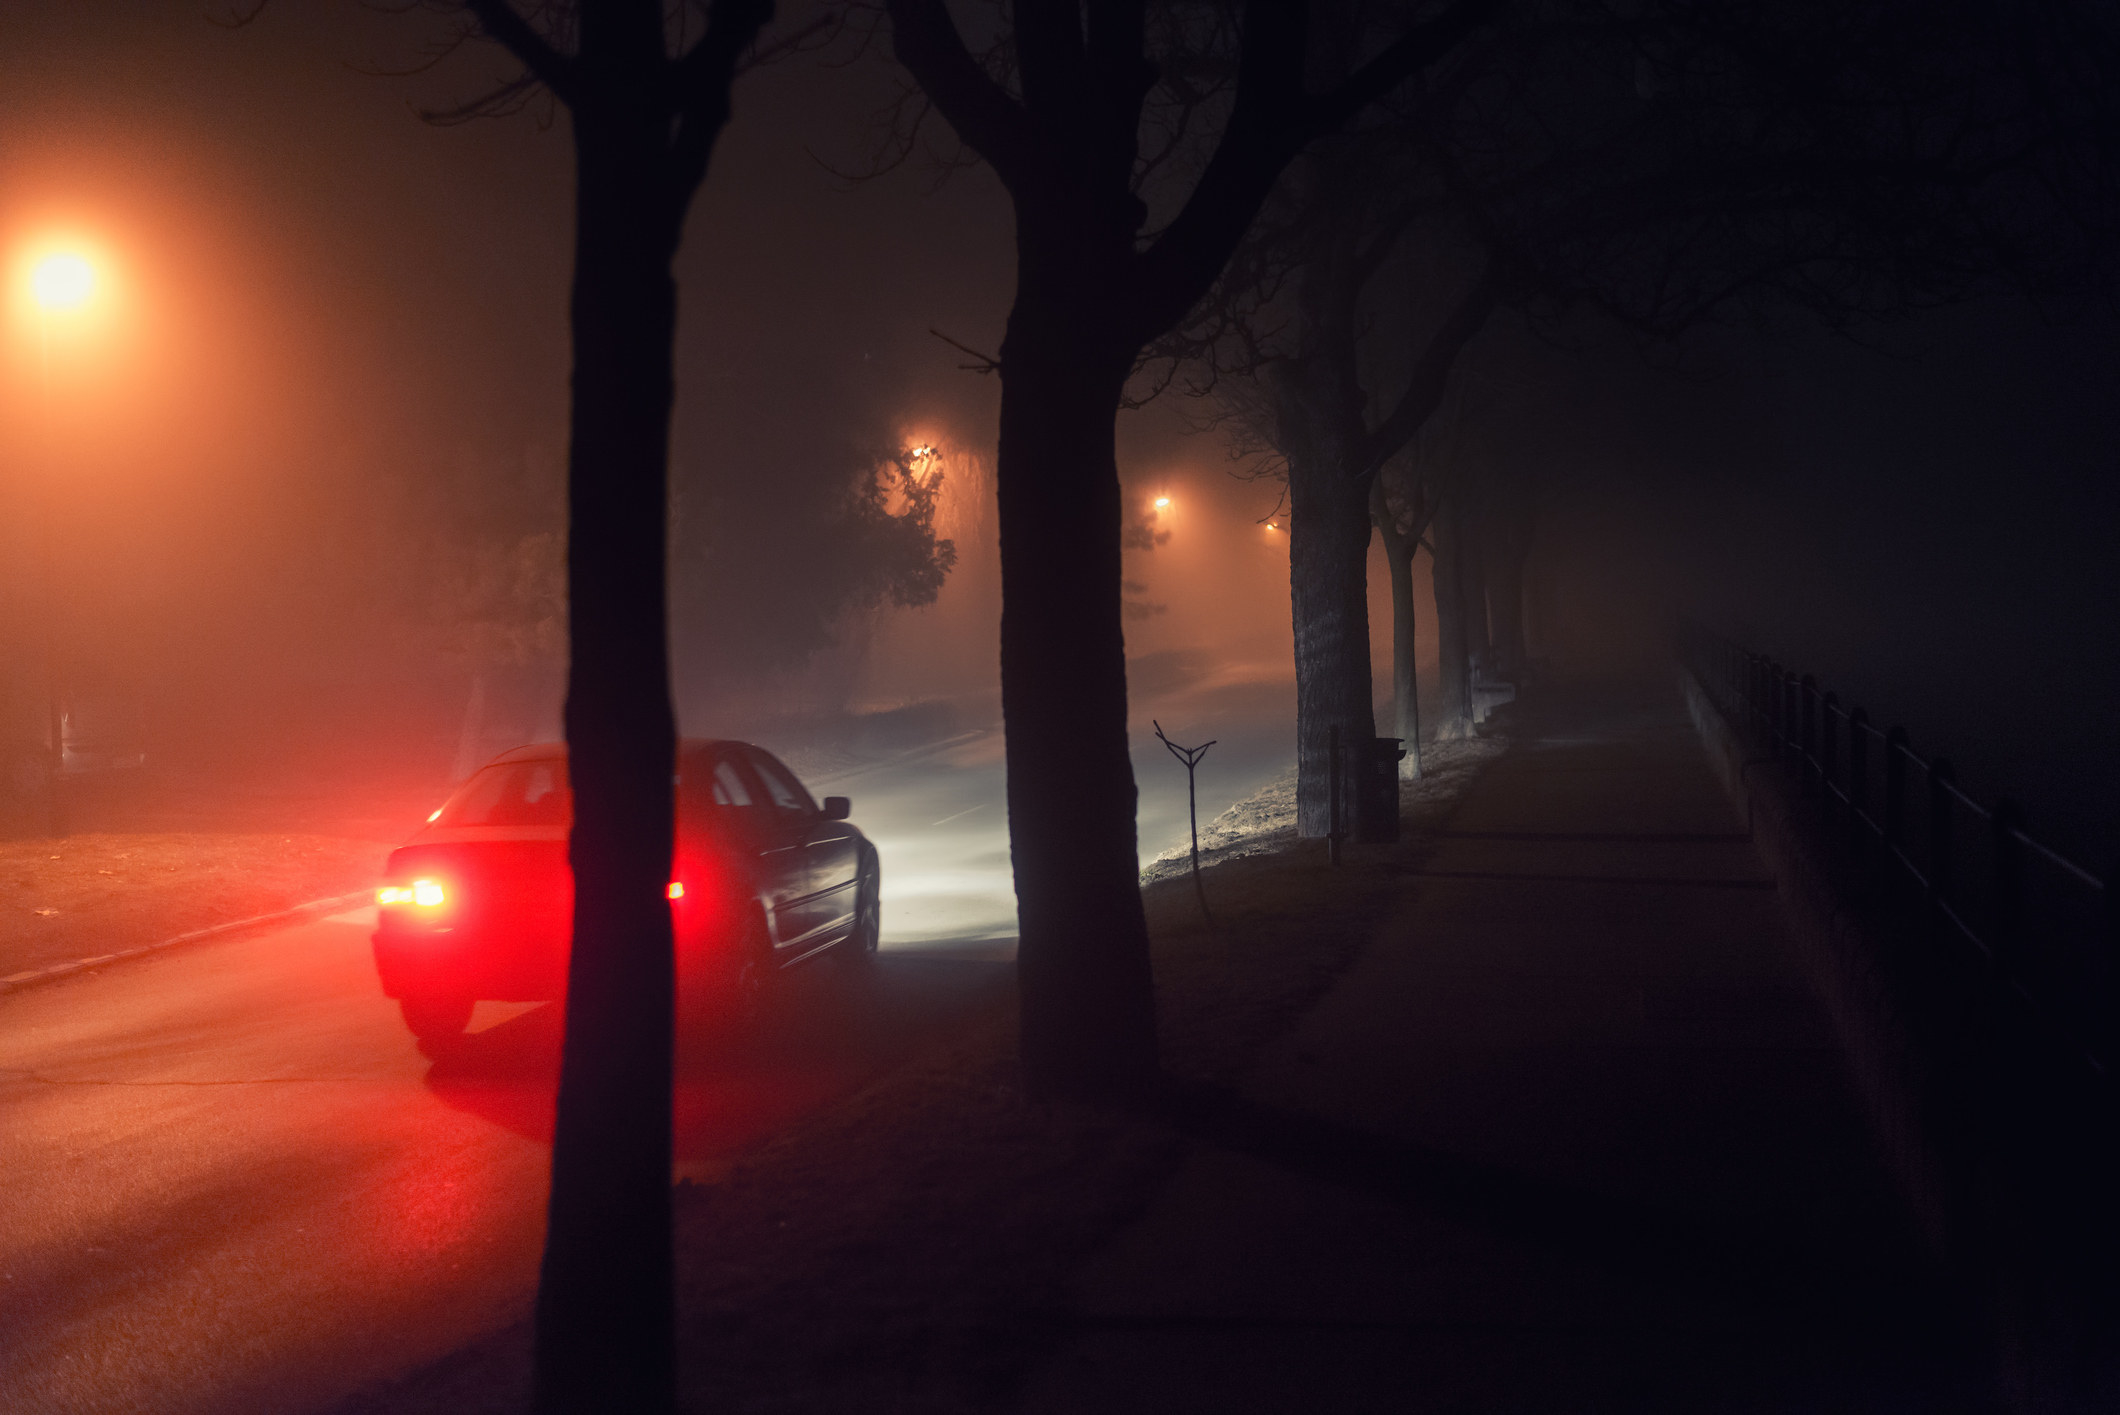 Pedestrian walkway and car moving through the city on misty winter night